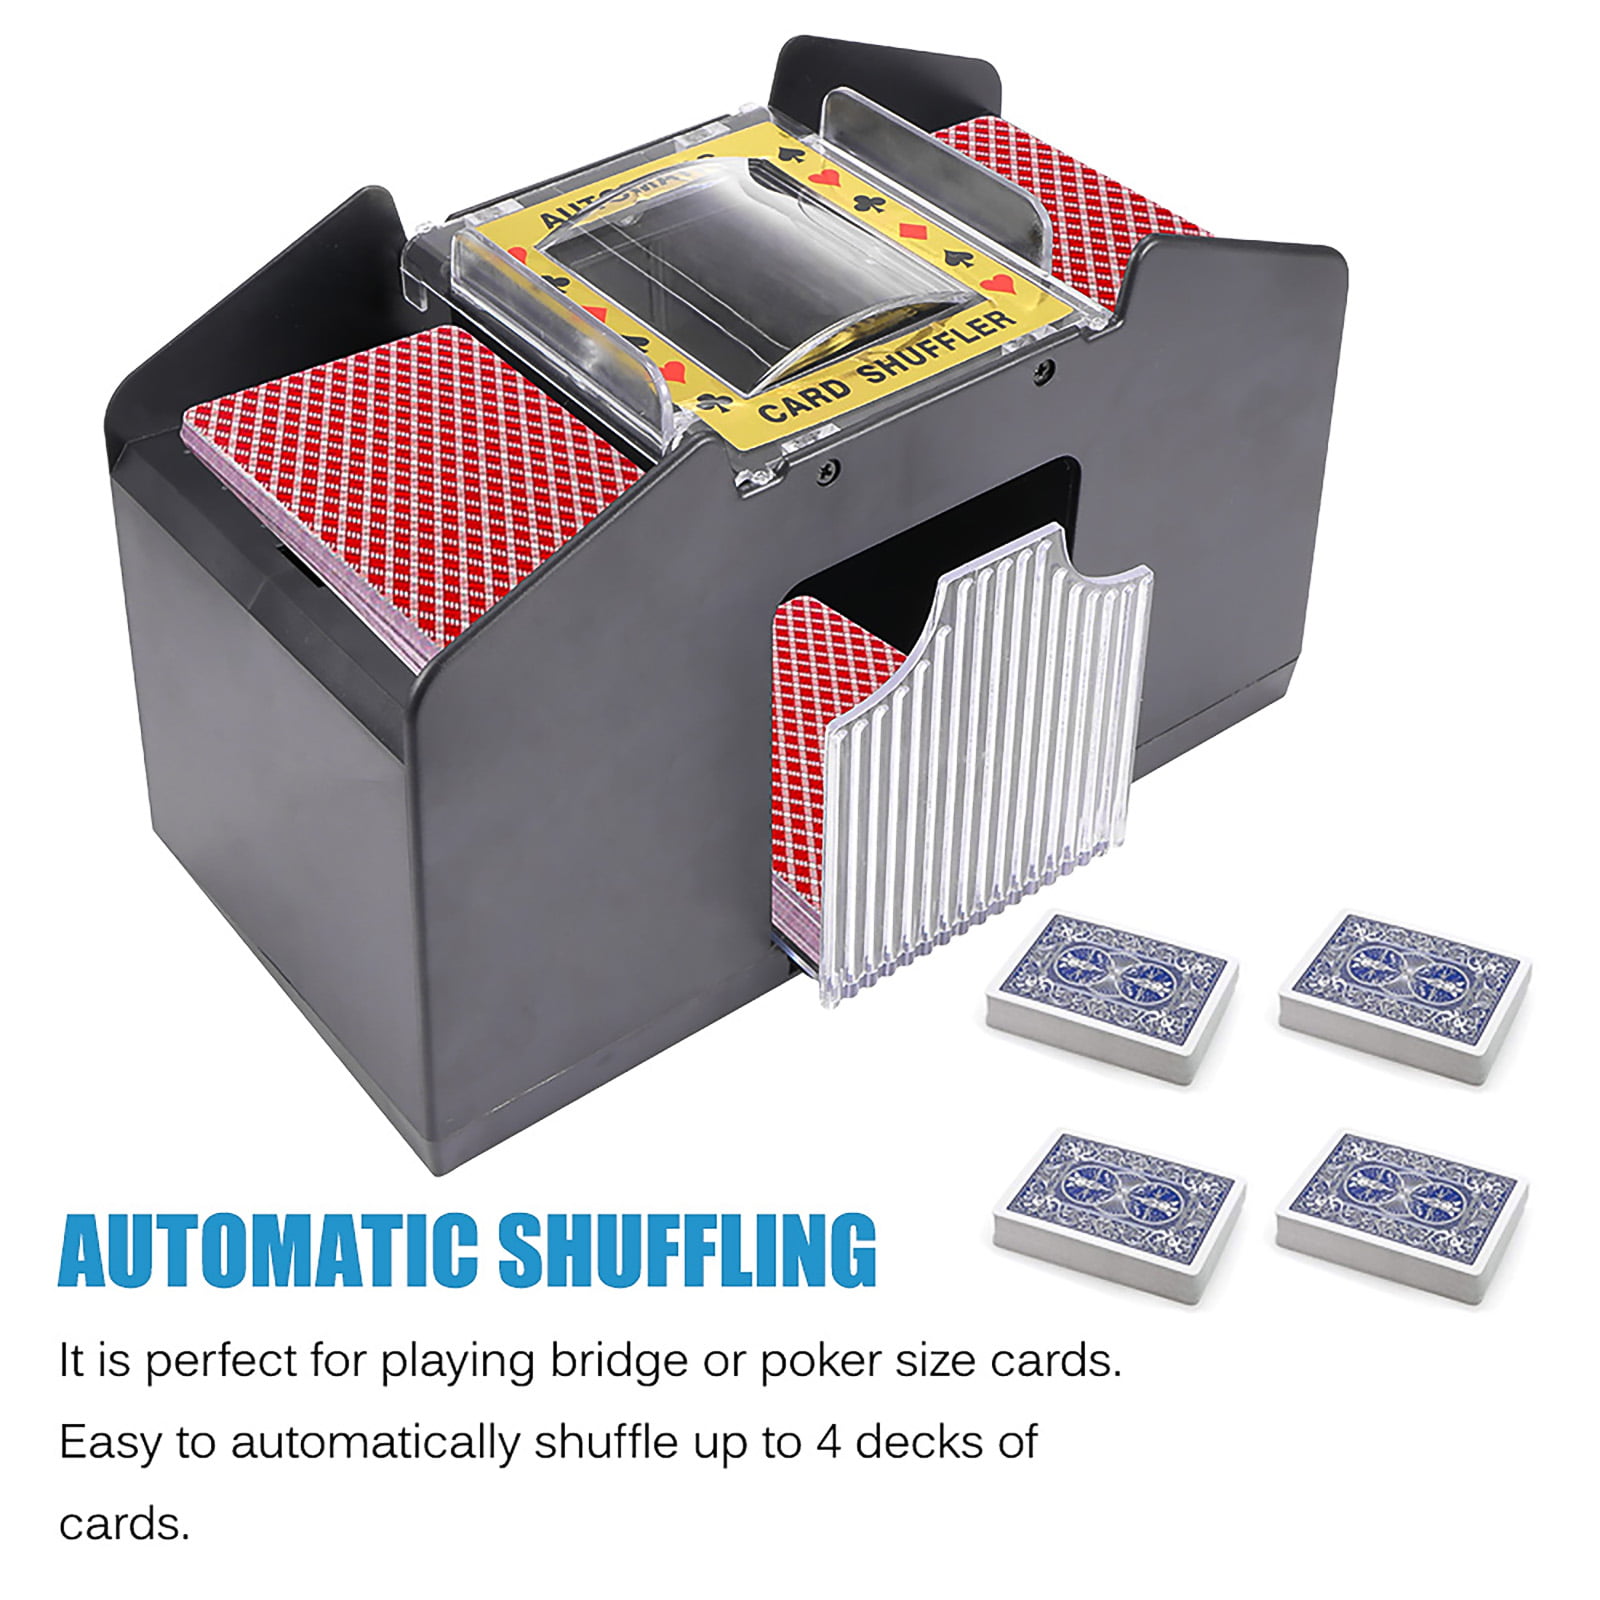 Automatic Card Shuffler and Tournament Use Card Shuffler Battery Operated Casino Card Shufflers Without Battery Great for House Party Club Games Like Poker Blackjack UNO 